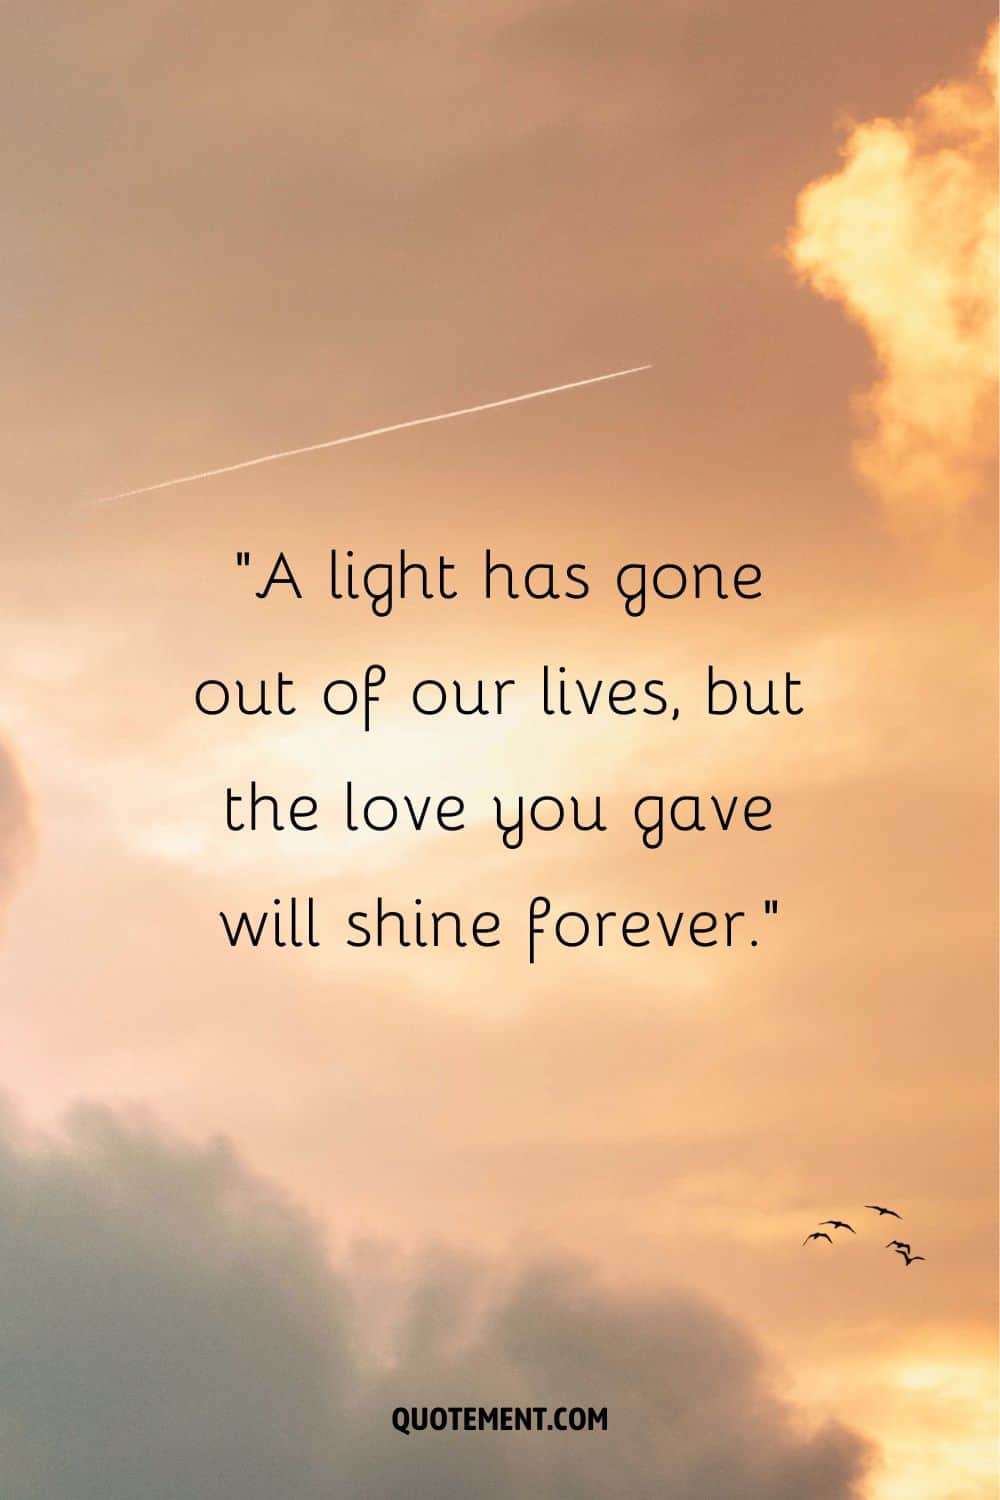 A light has gone out of our lives, but the love you gave will shine forever.